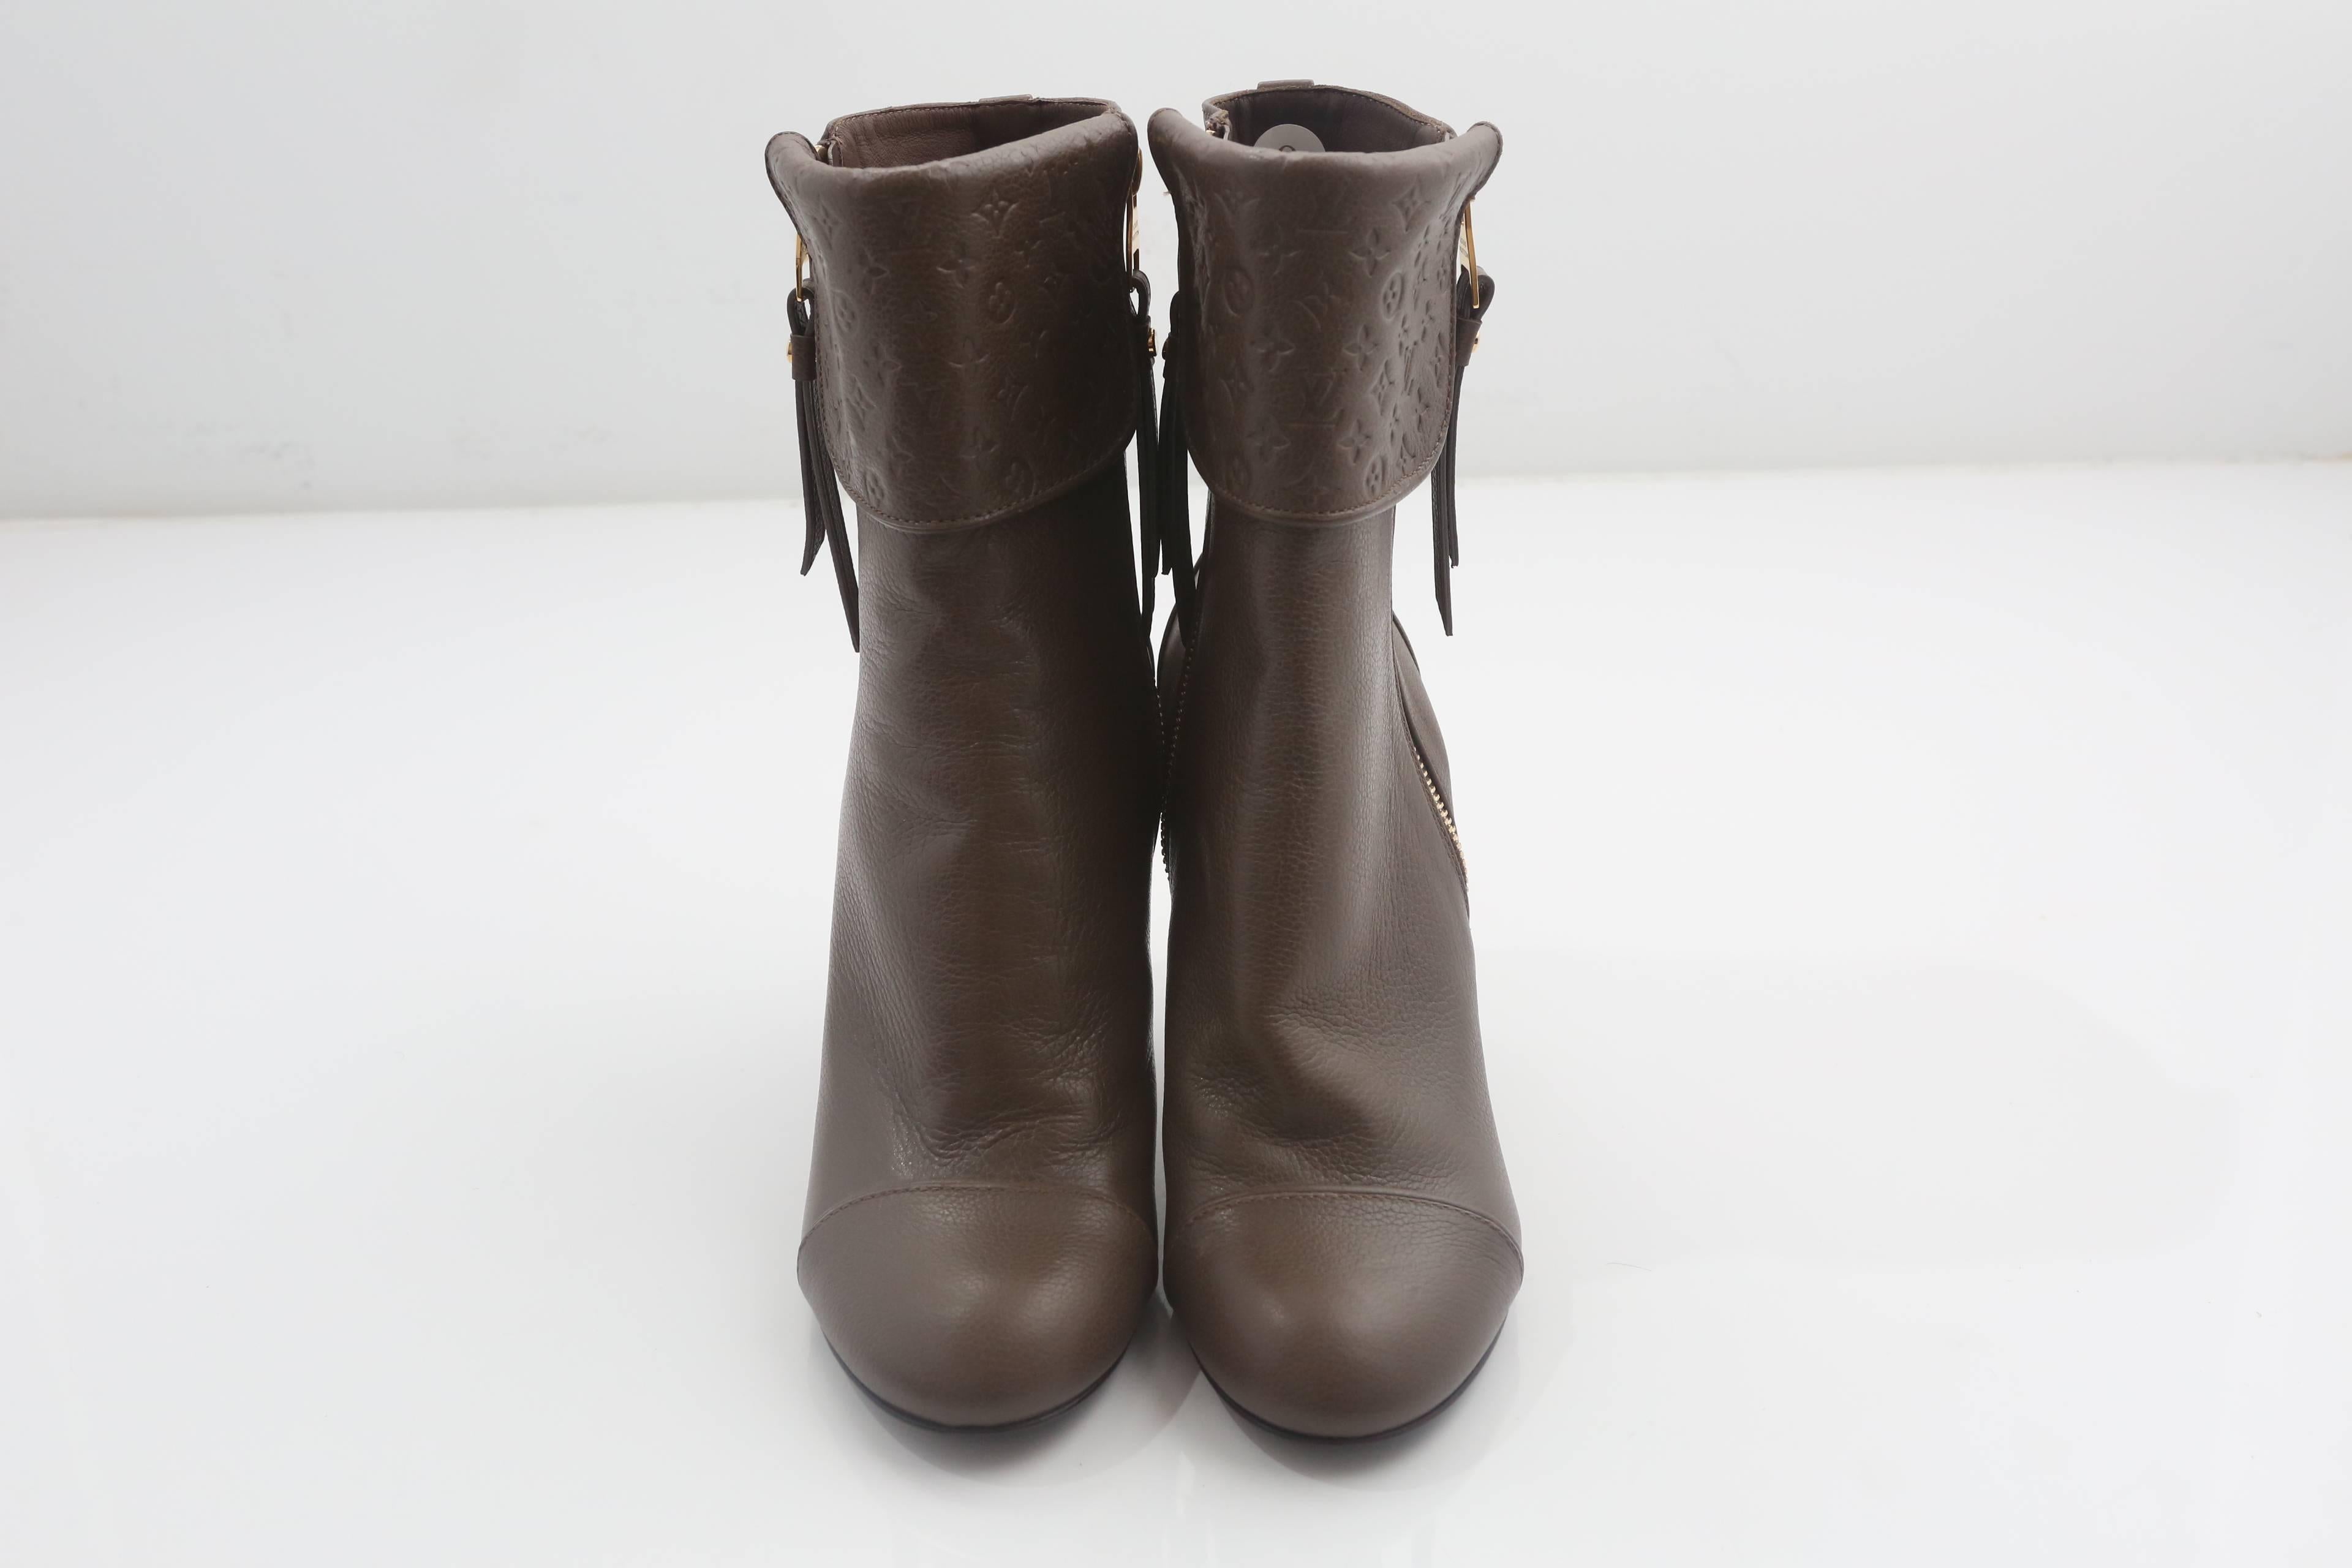 Louis Vuitton brown leather booties with double side zipper, tonal embossed monogram logo at front foldover flap.